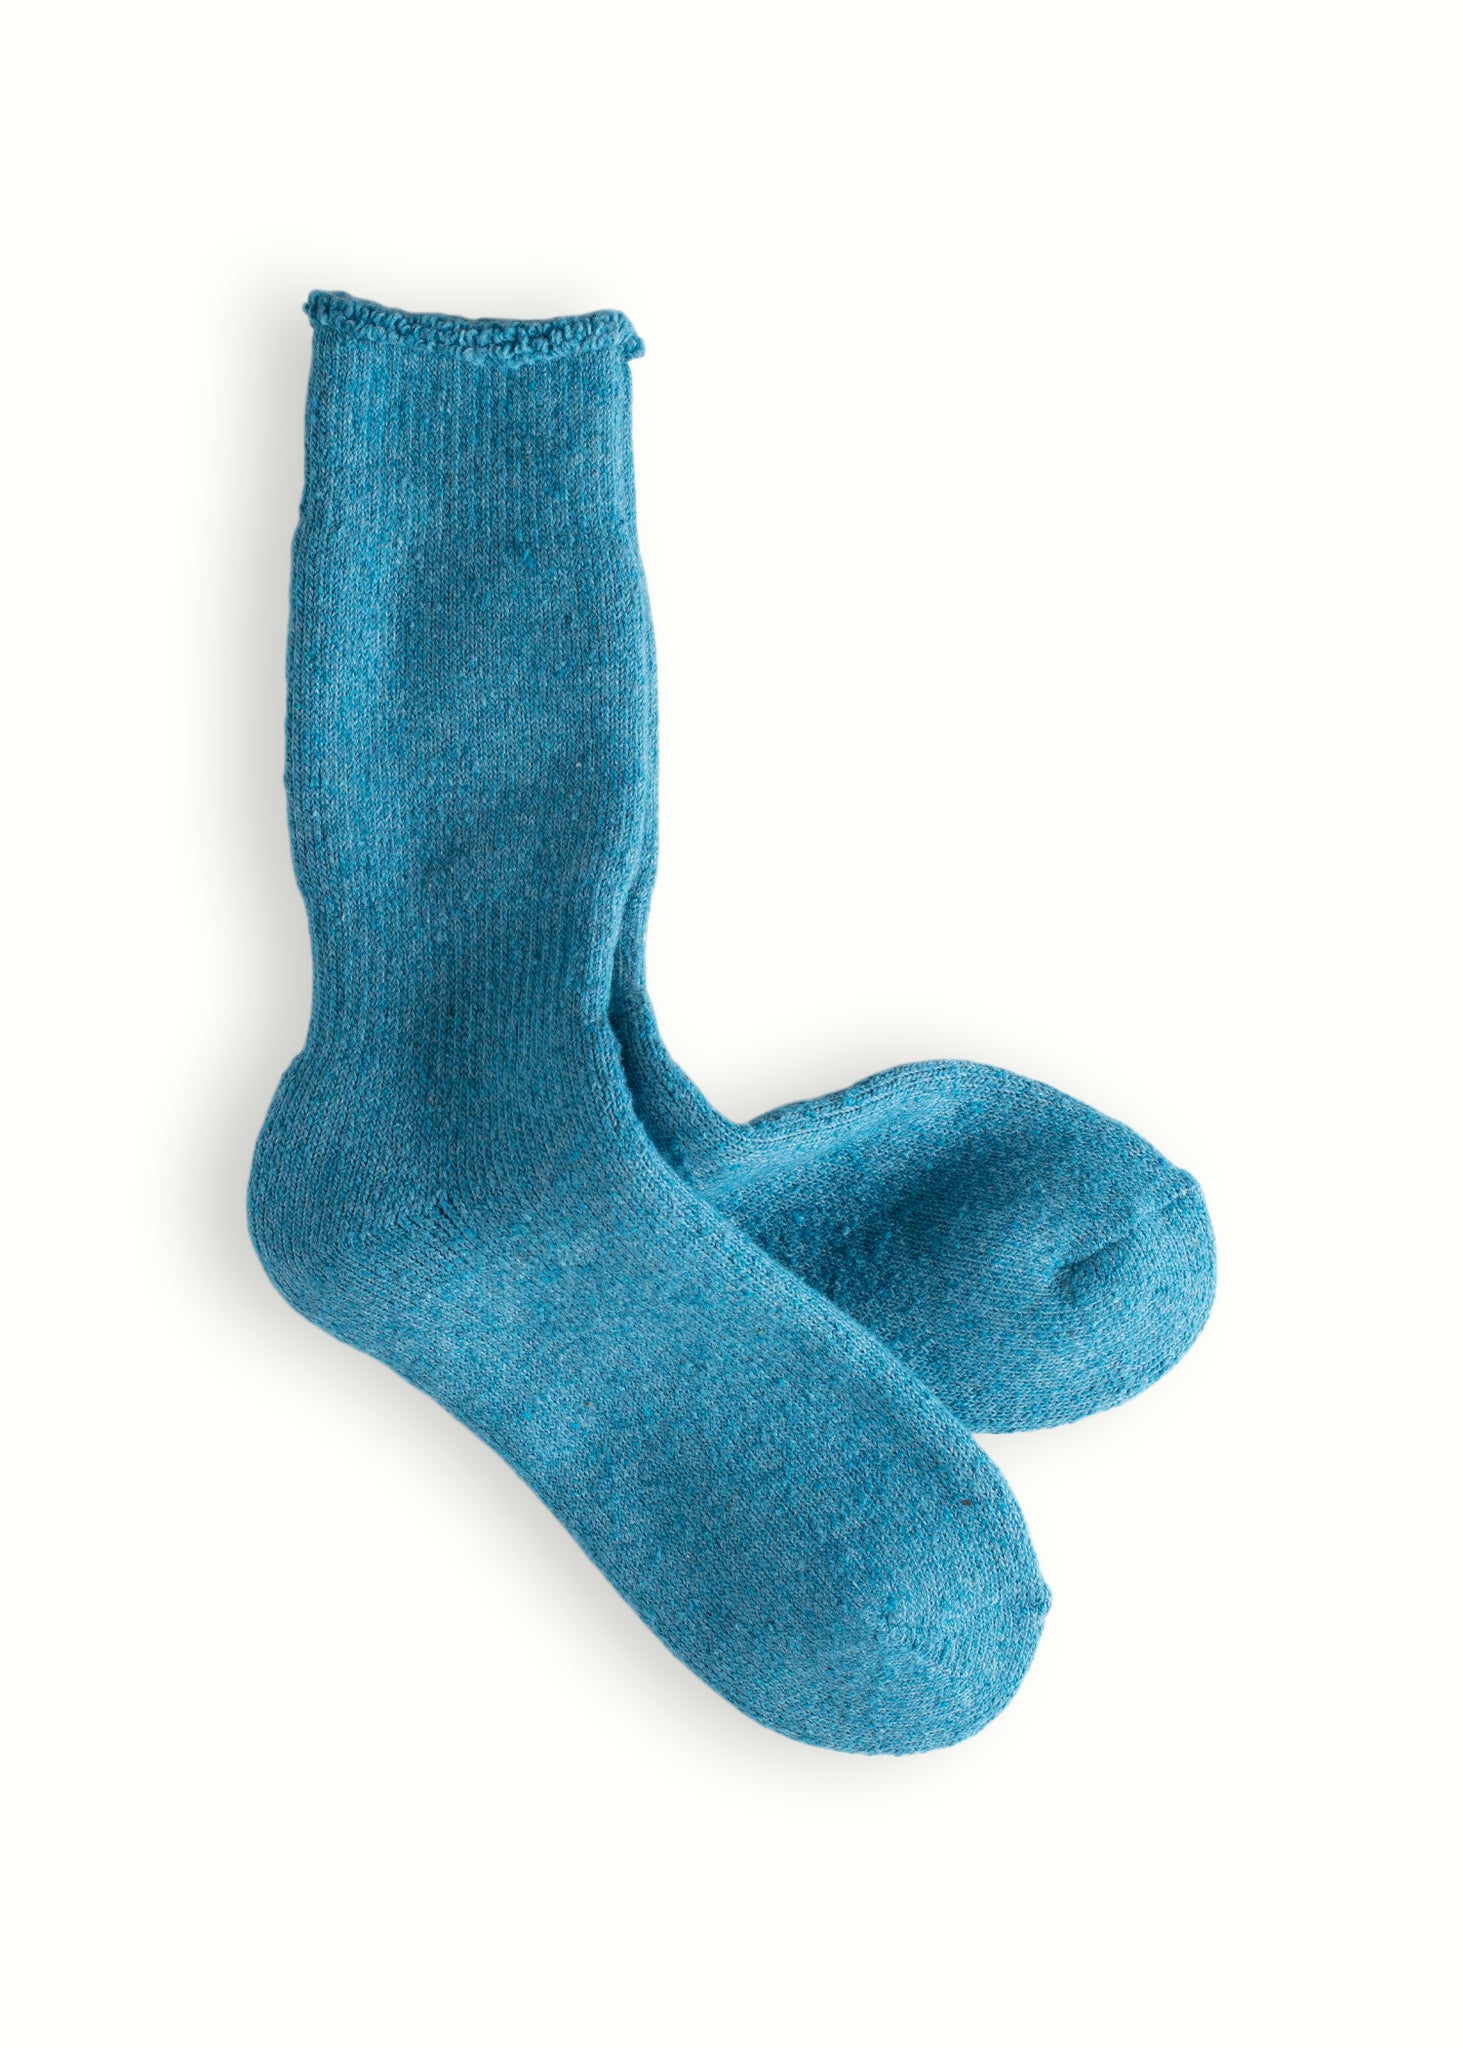 Thunders Love Outdoor Recycled Wool Turquoise Socks